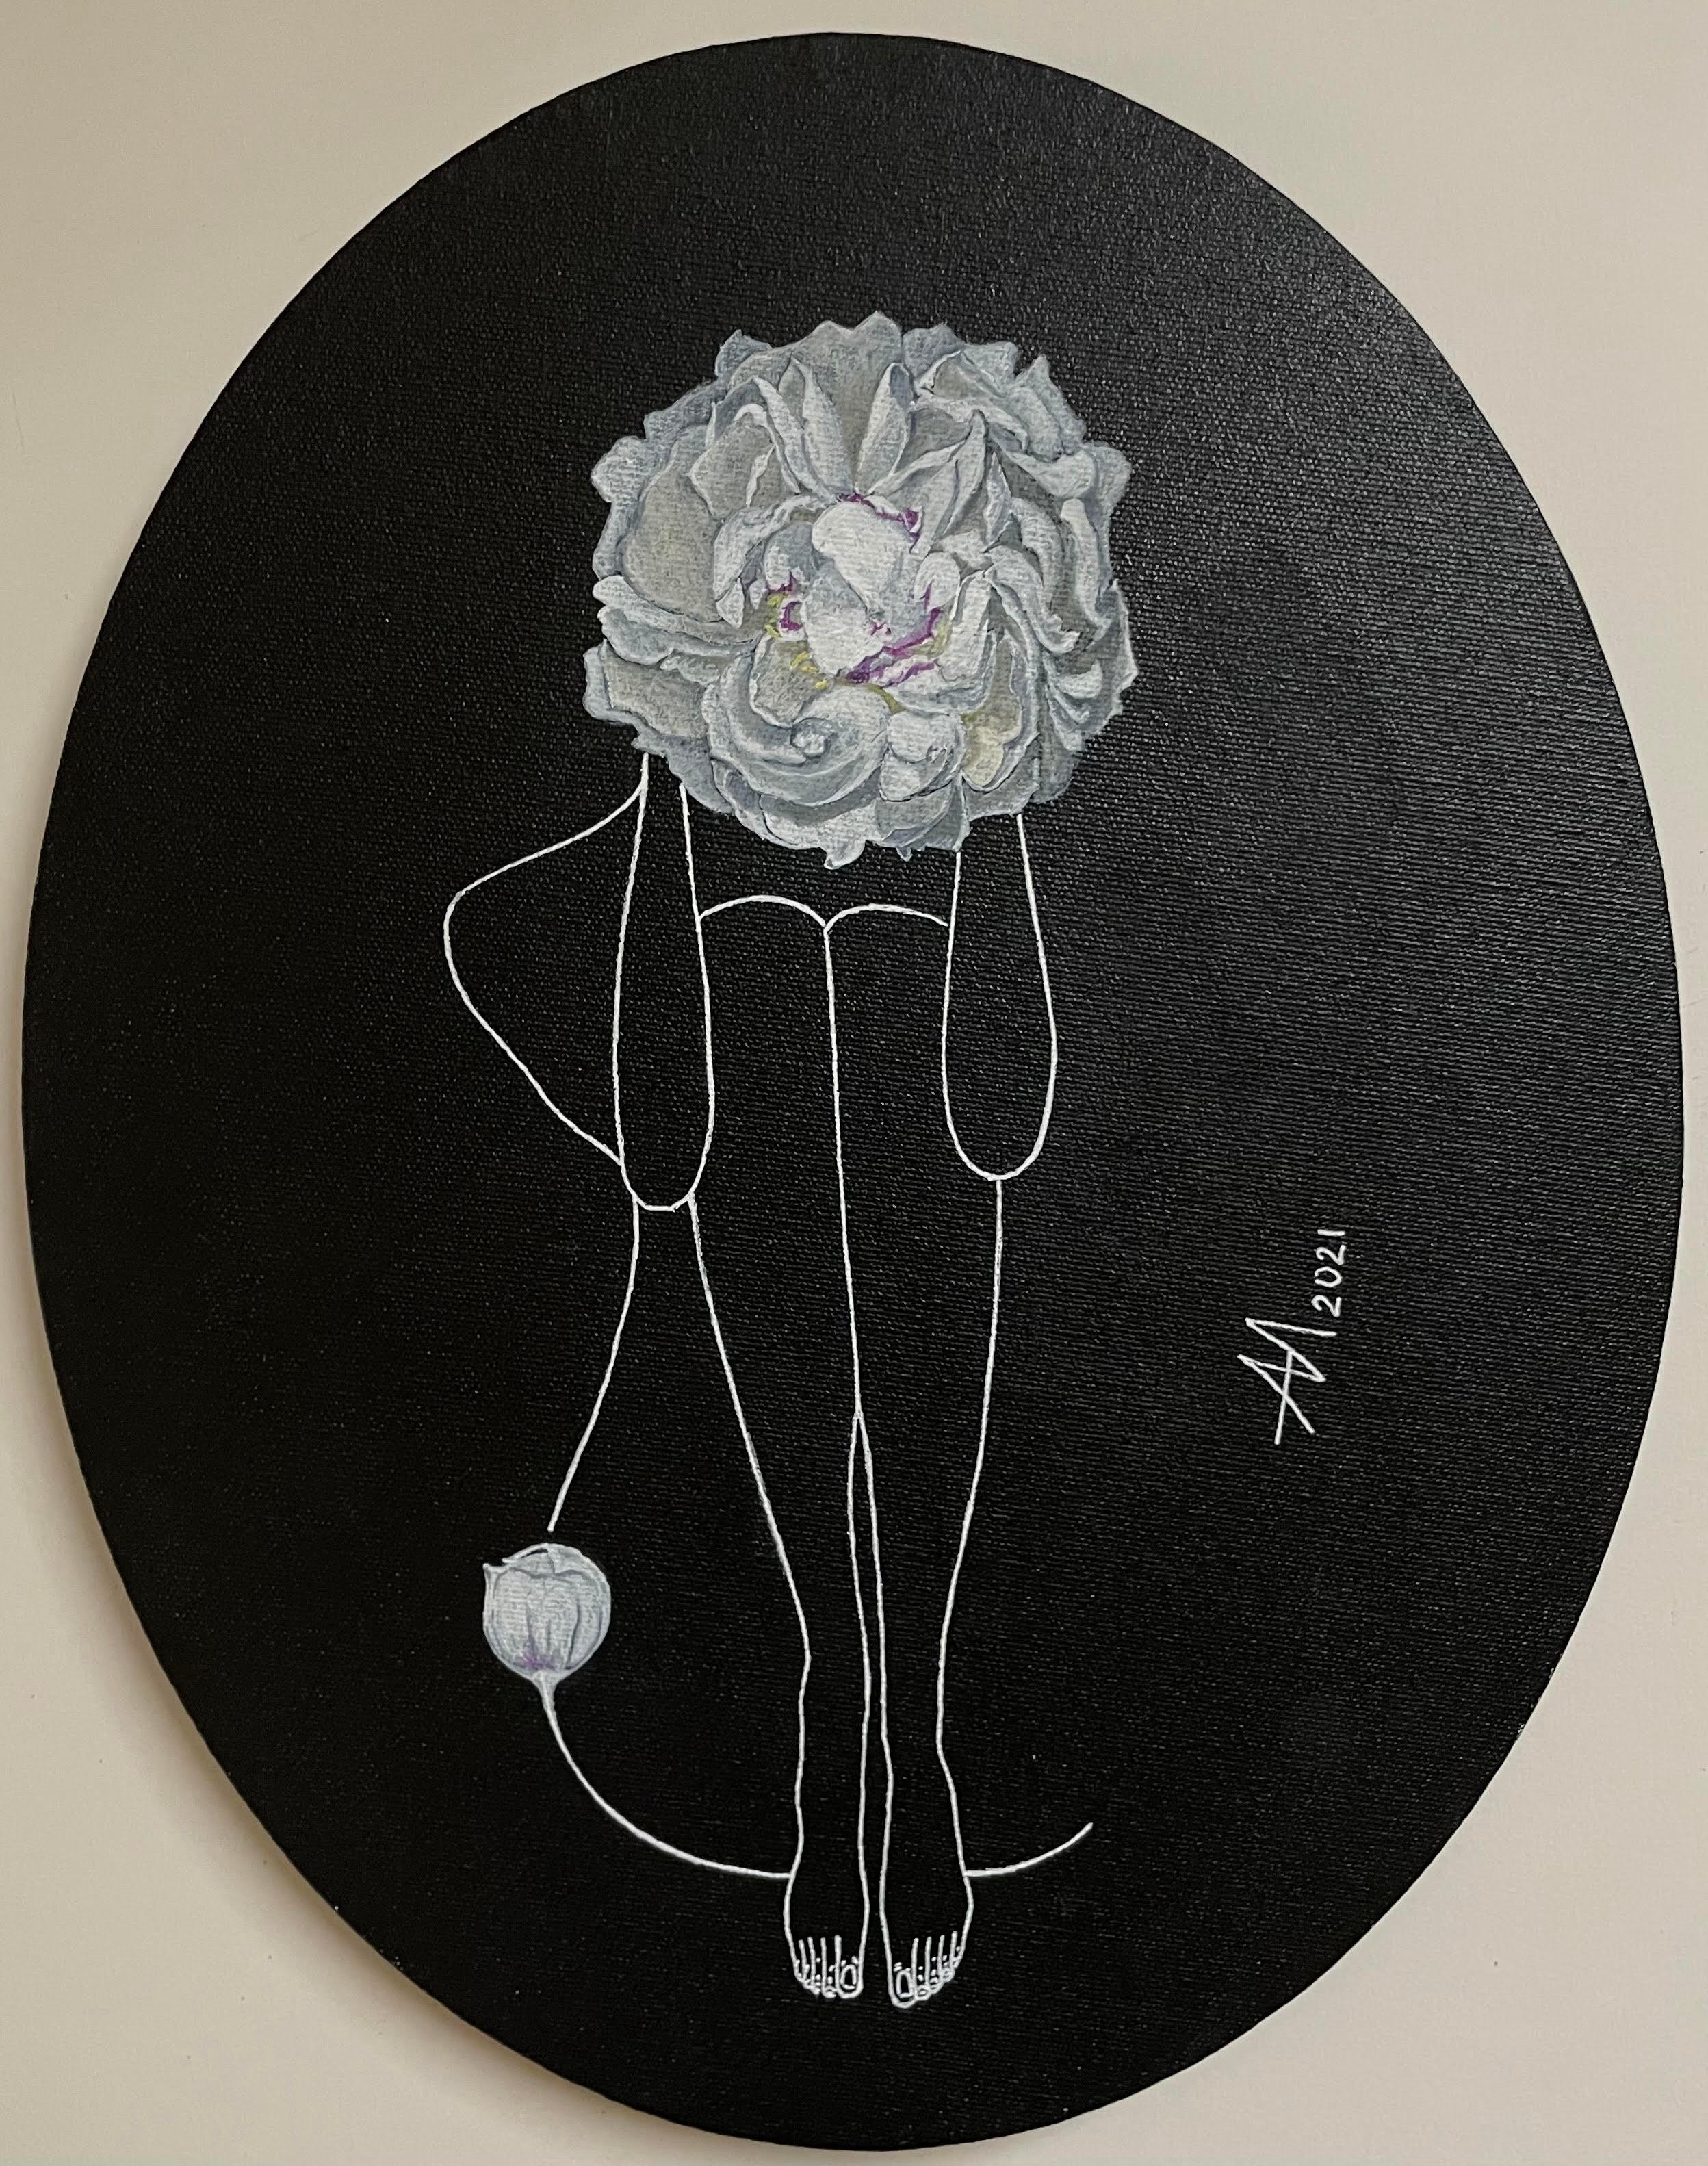 Mila Akopova Nude Painting - White on black - line drawing women figures with white peony